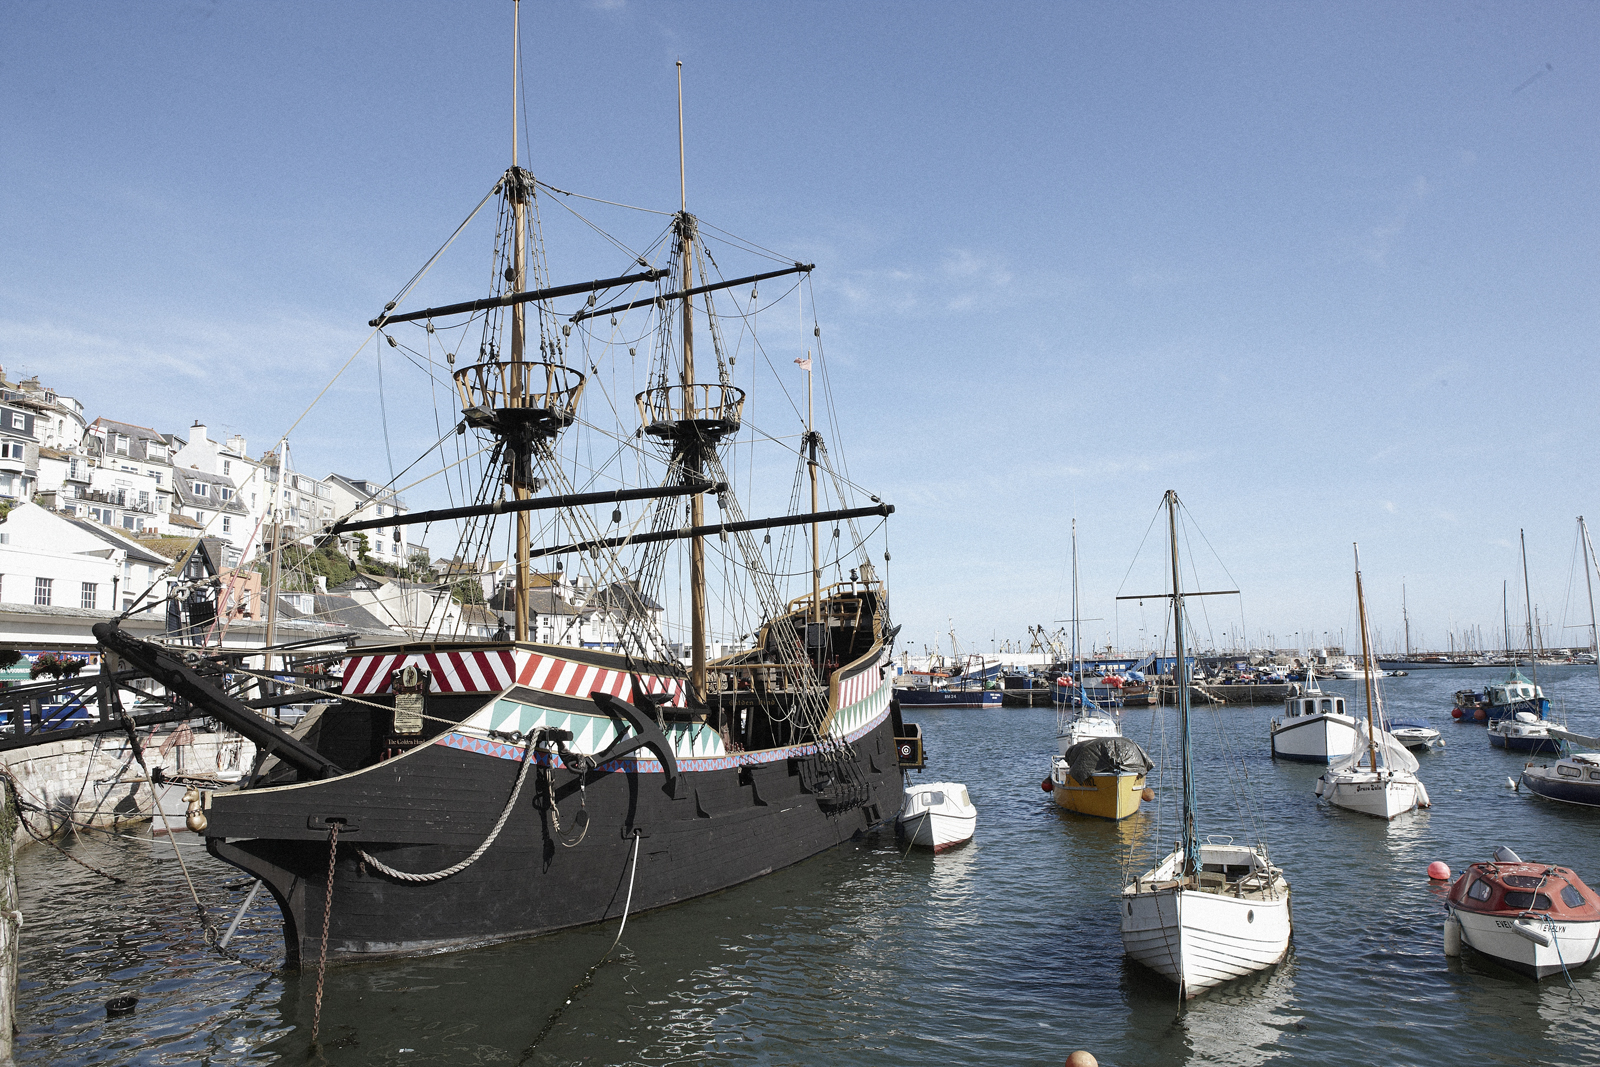 The Golden Hind, one of The English Riviera's main tourist attractions.